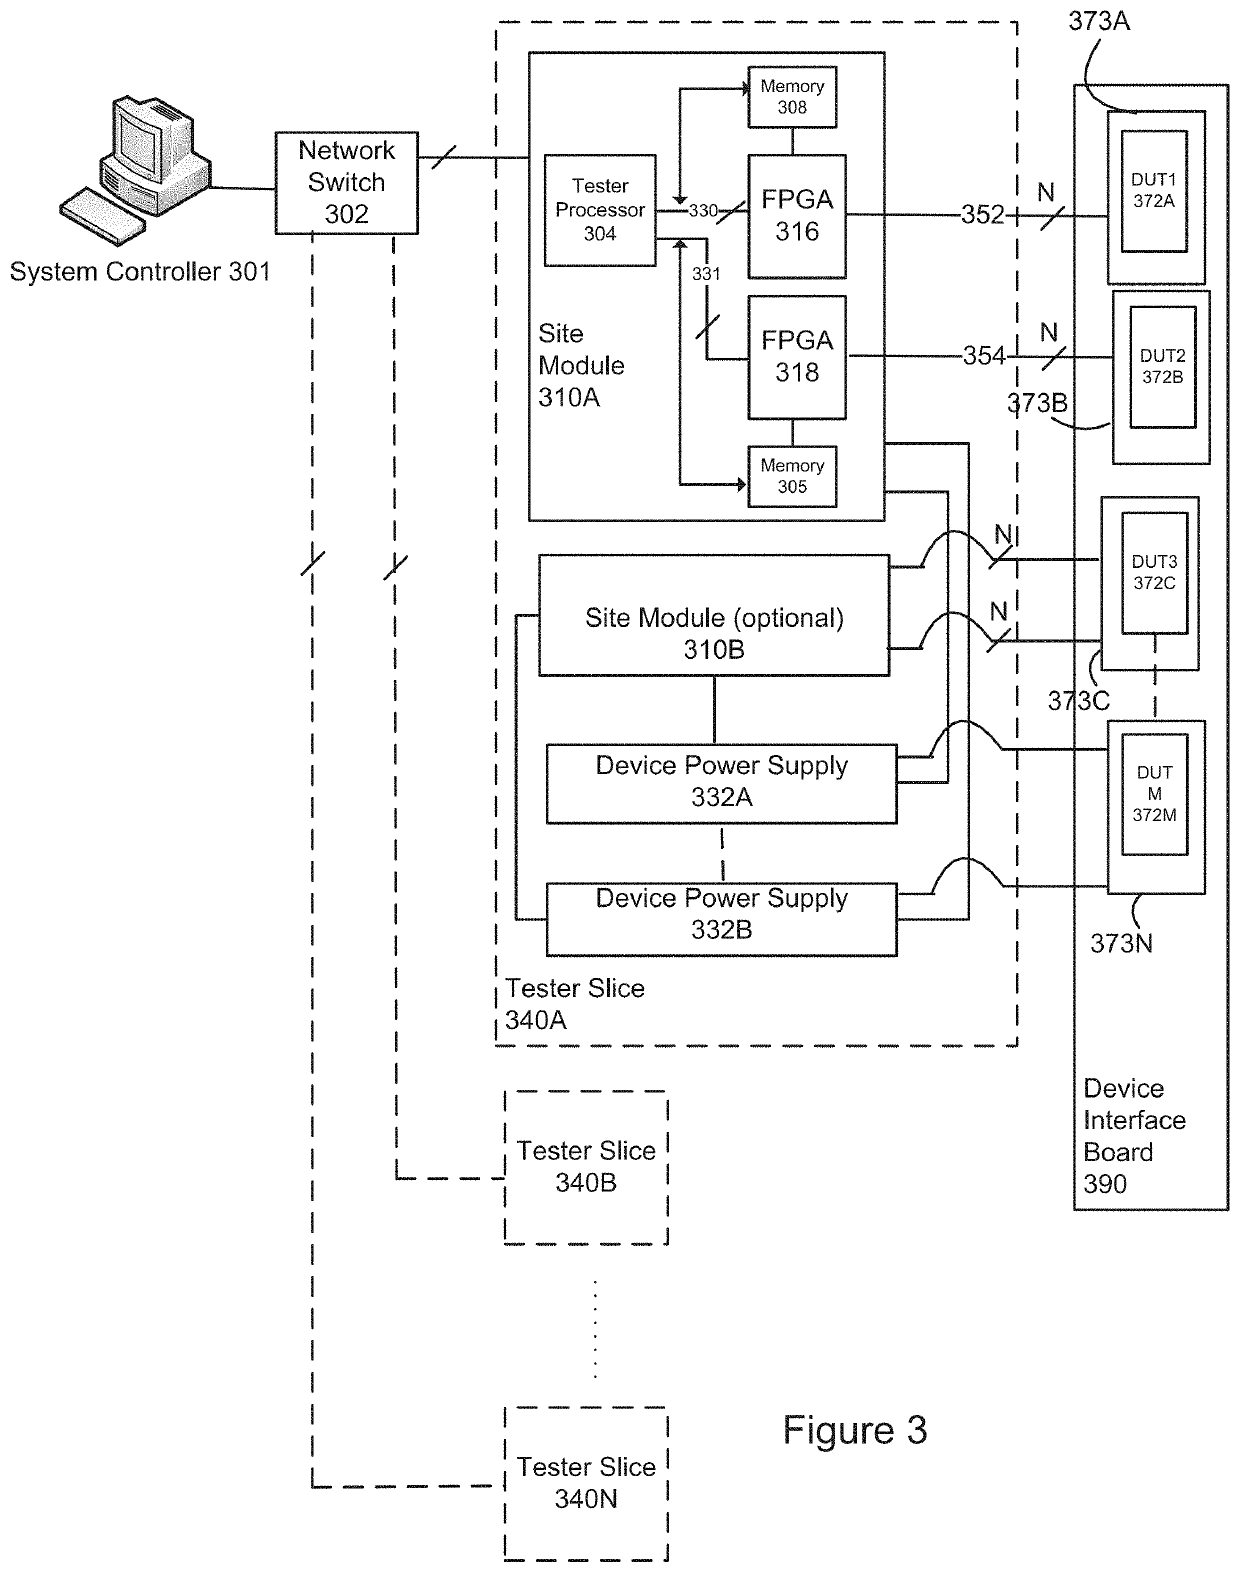 Device interface board supporting devices with mulitple different standards to inerface with the same socket